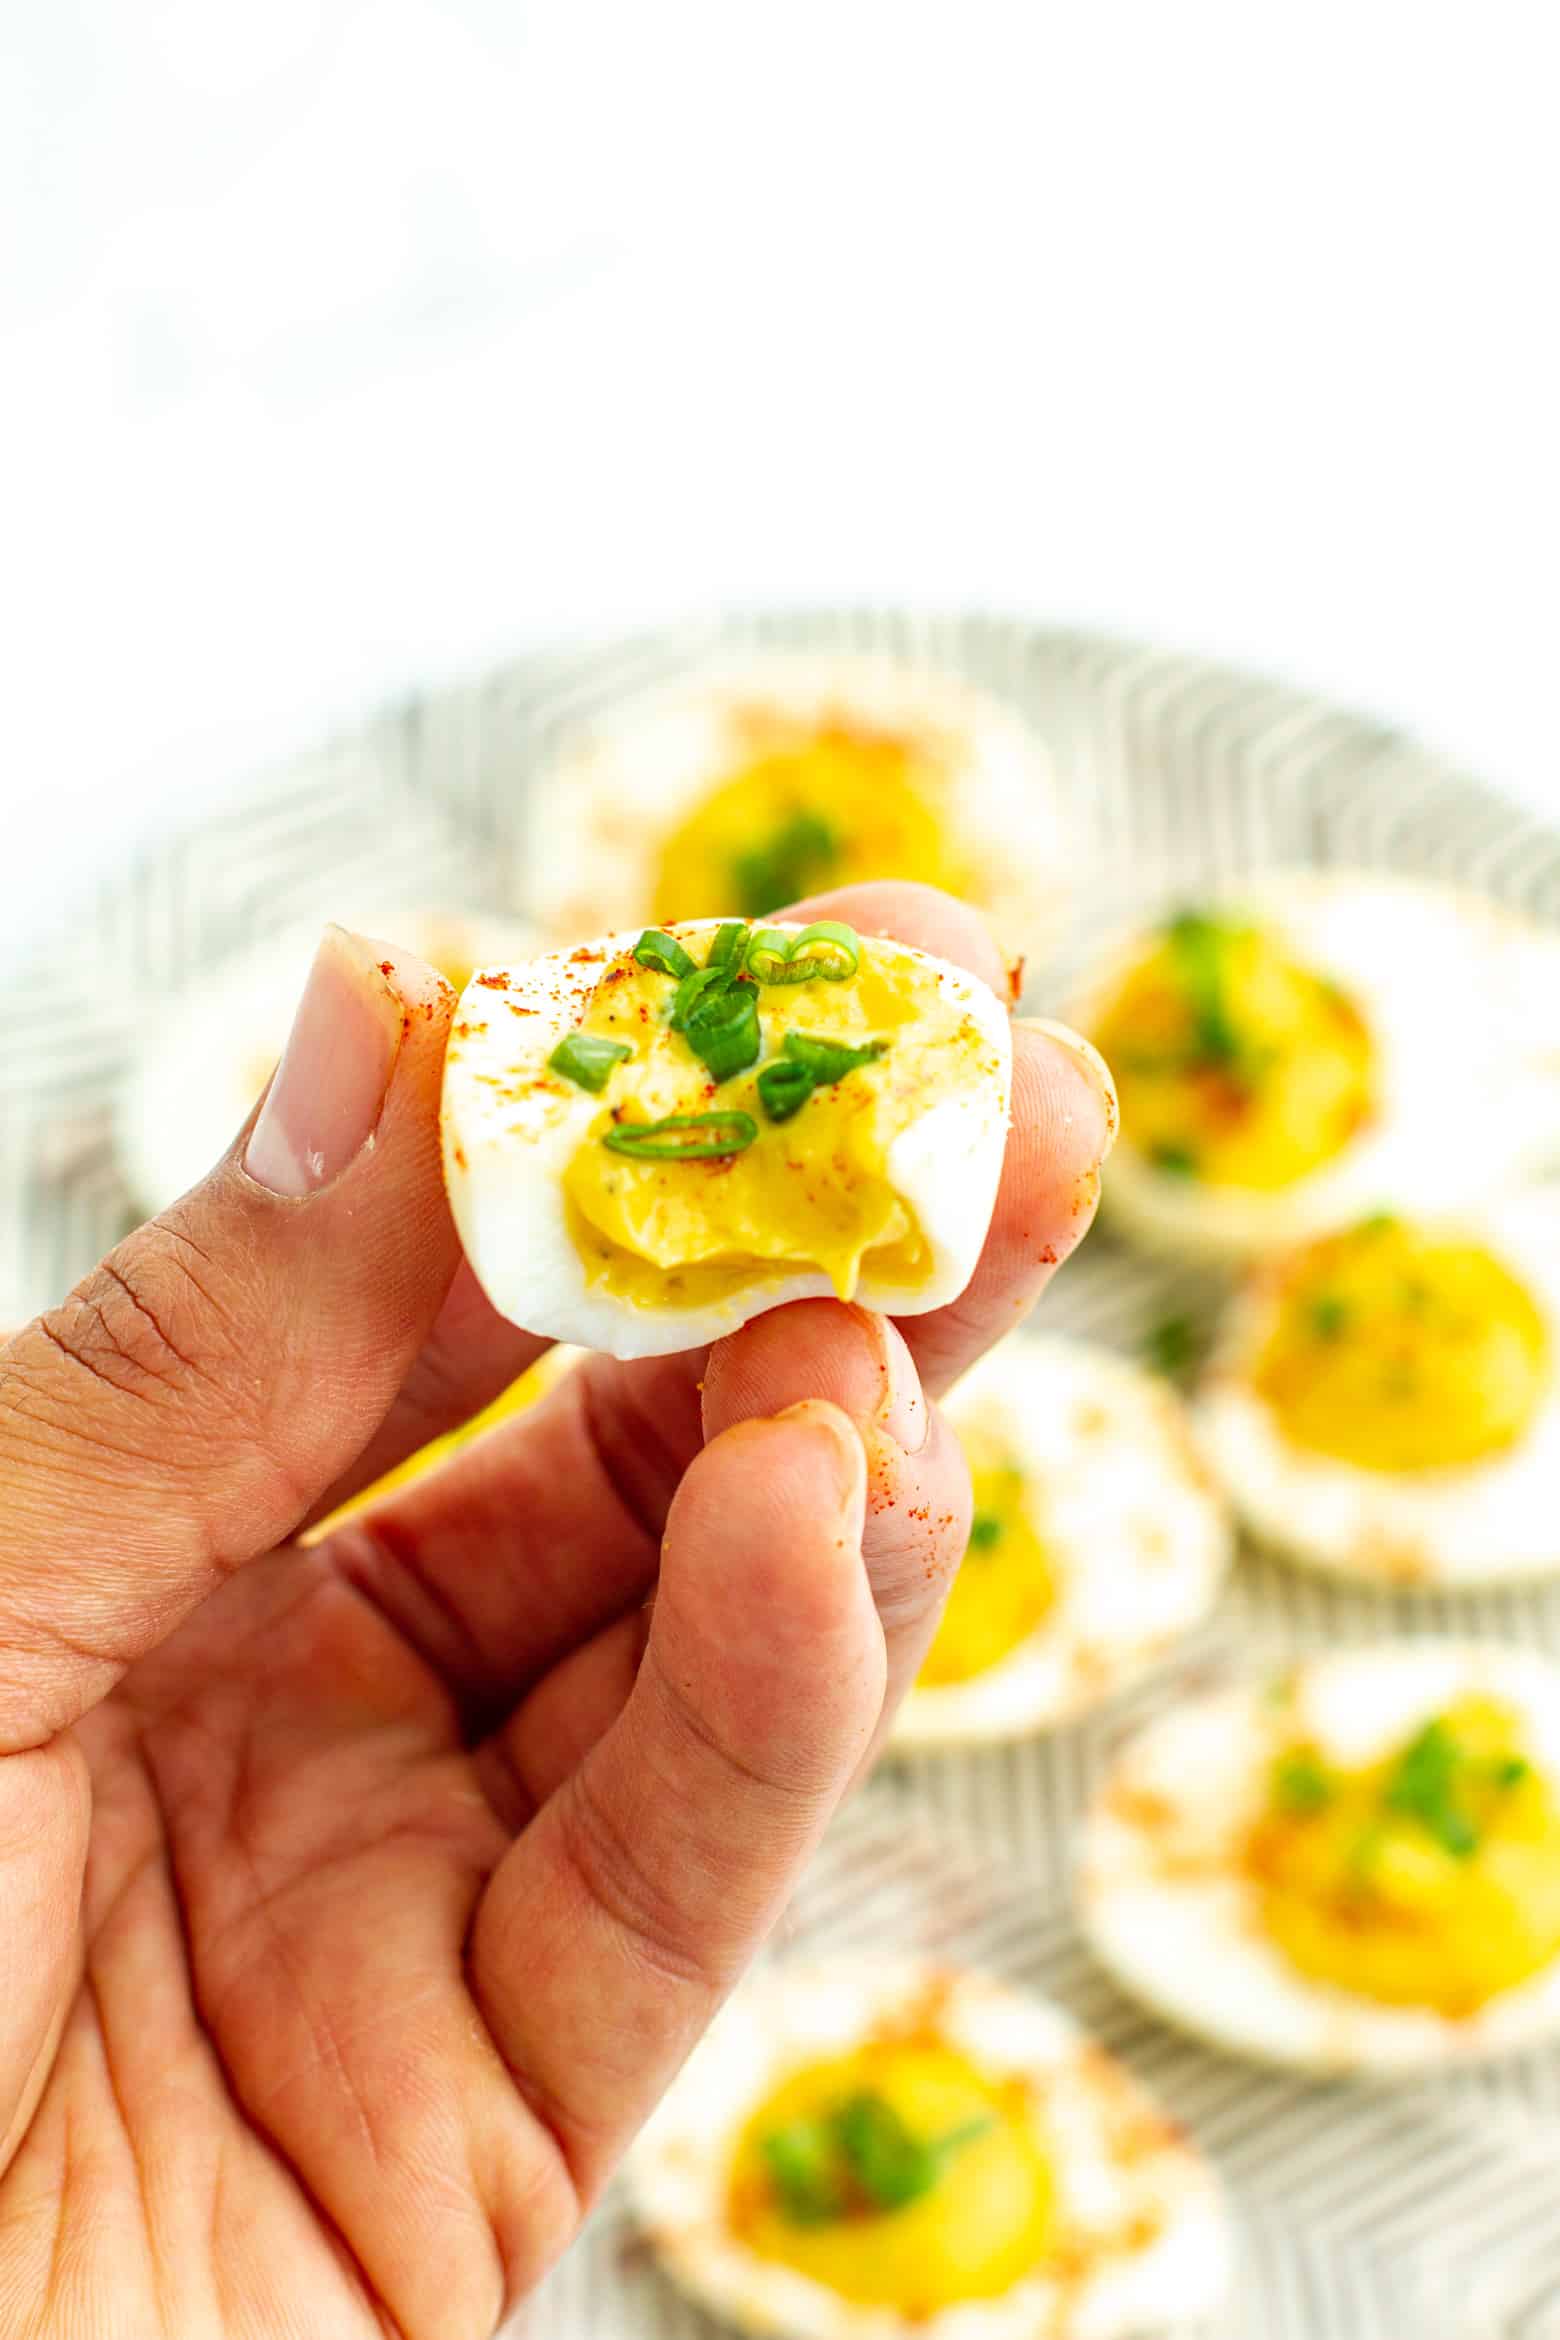 Southern Deviled Eggs  with a bite taken out being held in hand.